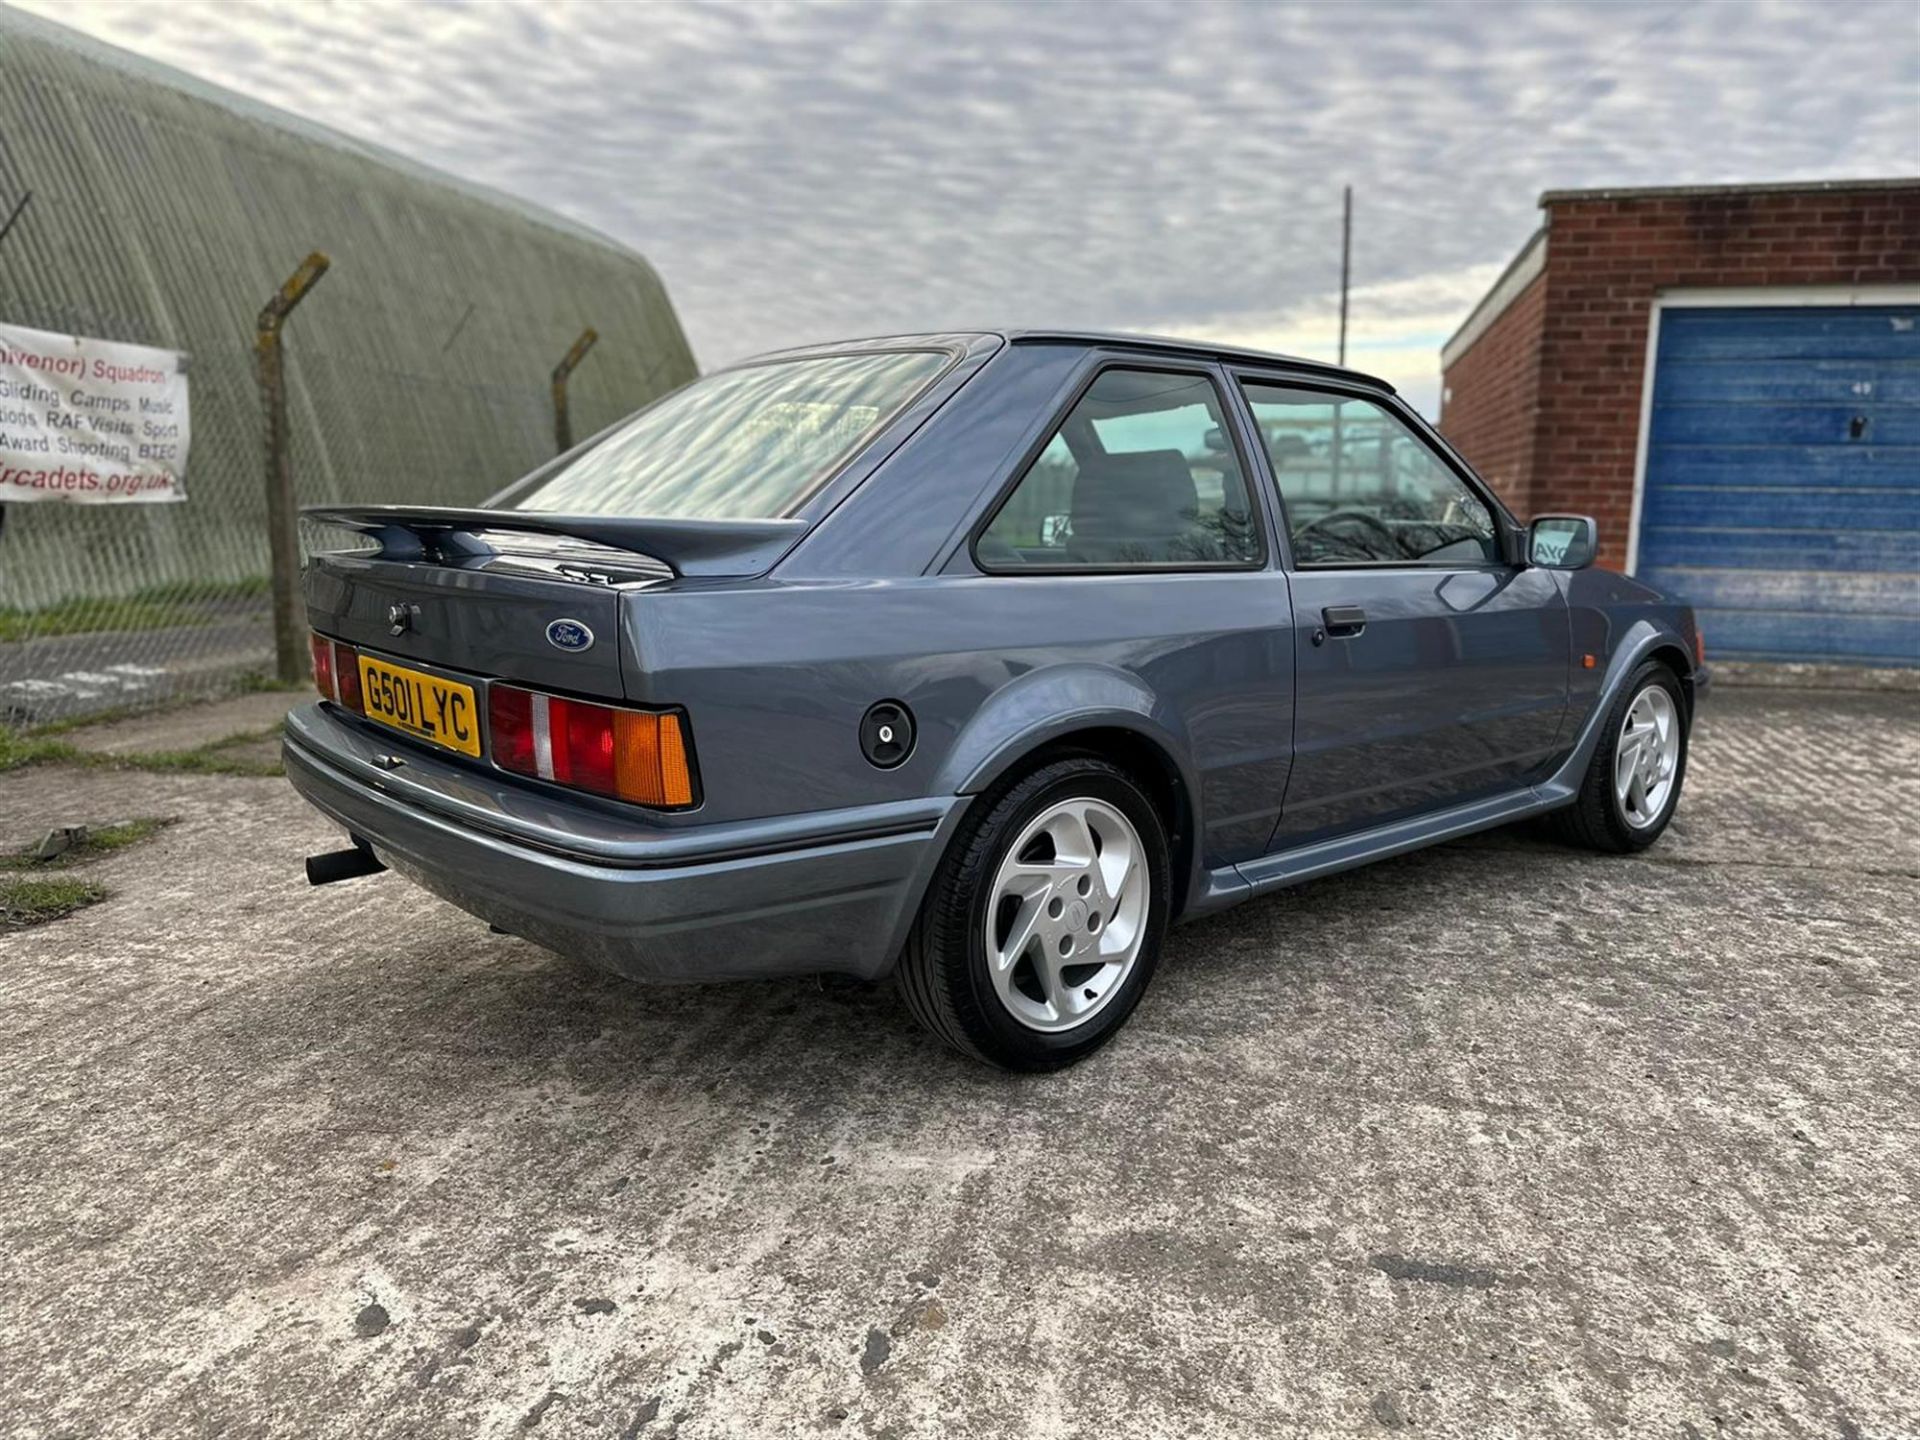 1989 Ford Escort RS Turbo S2 - Image 17 of 20